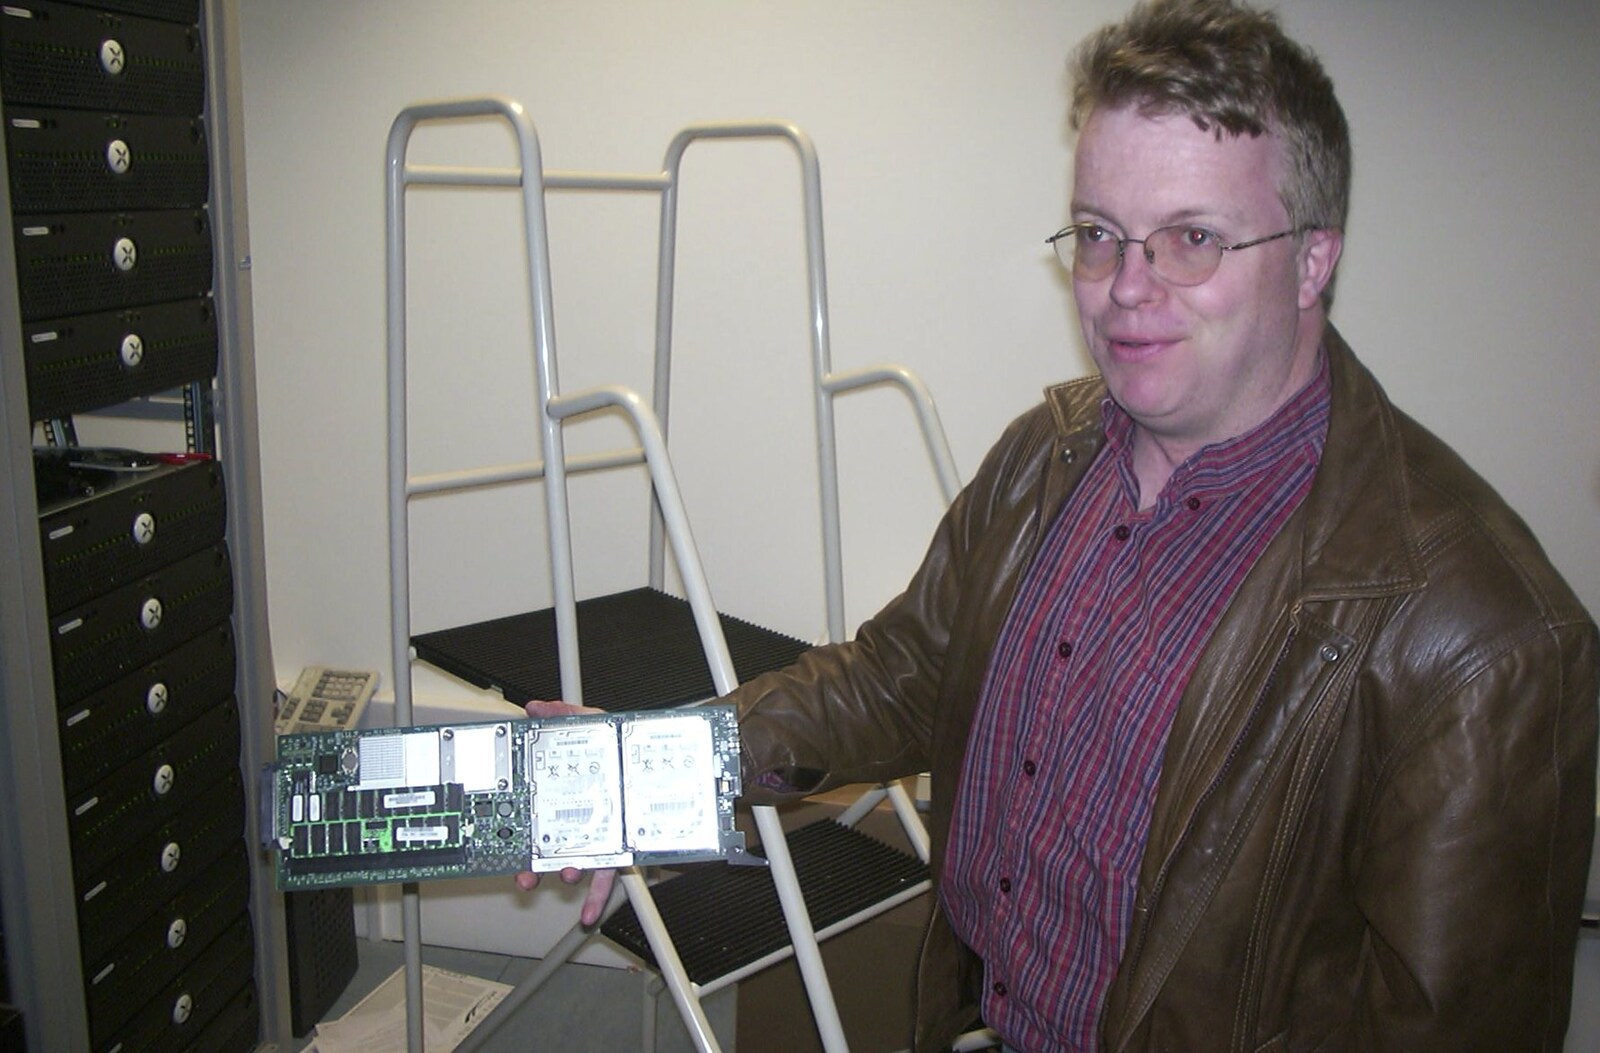 Dave's colleagure shows us a new Blade Server from A Trigenix Trip to the Sanger Centre, Hinxton, Cambridgeshire - 23rd April 2004